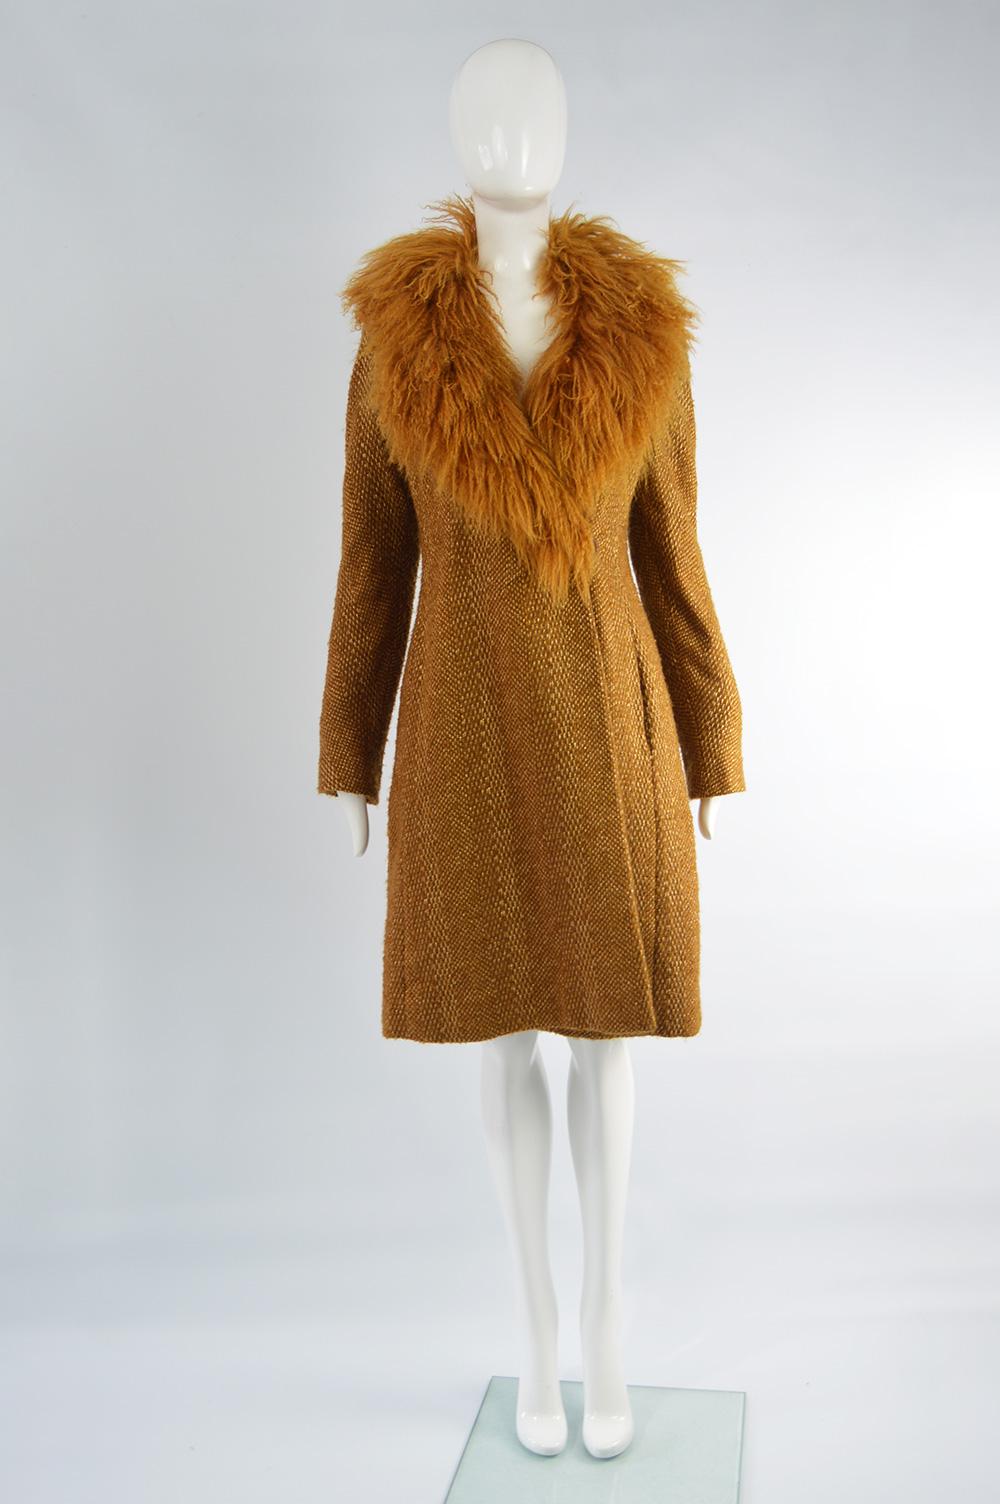 An incredible vintage womens Valentino coat from the 80s. In a brown tweed with thick gold lurex threads shot throughout. The mongolian sheep fur collar adds a glamorous touch, 

Size: Not indicated. fits like a UK 10/ US 6/ EU 38. Please check